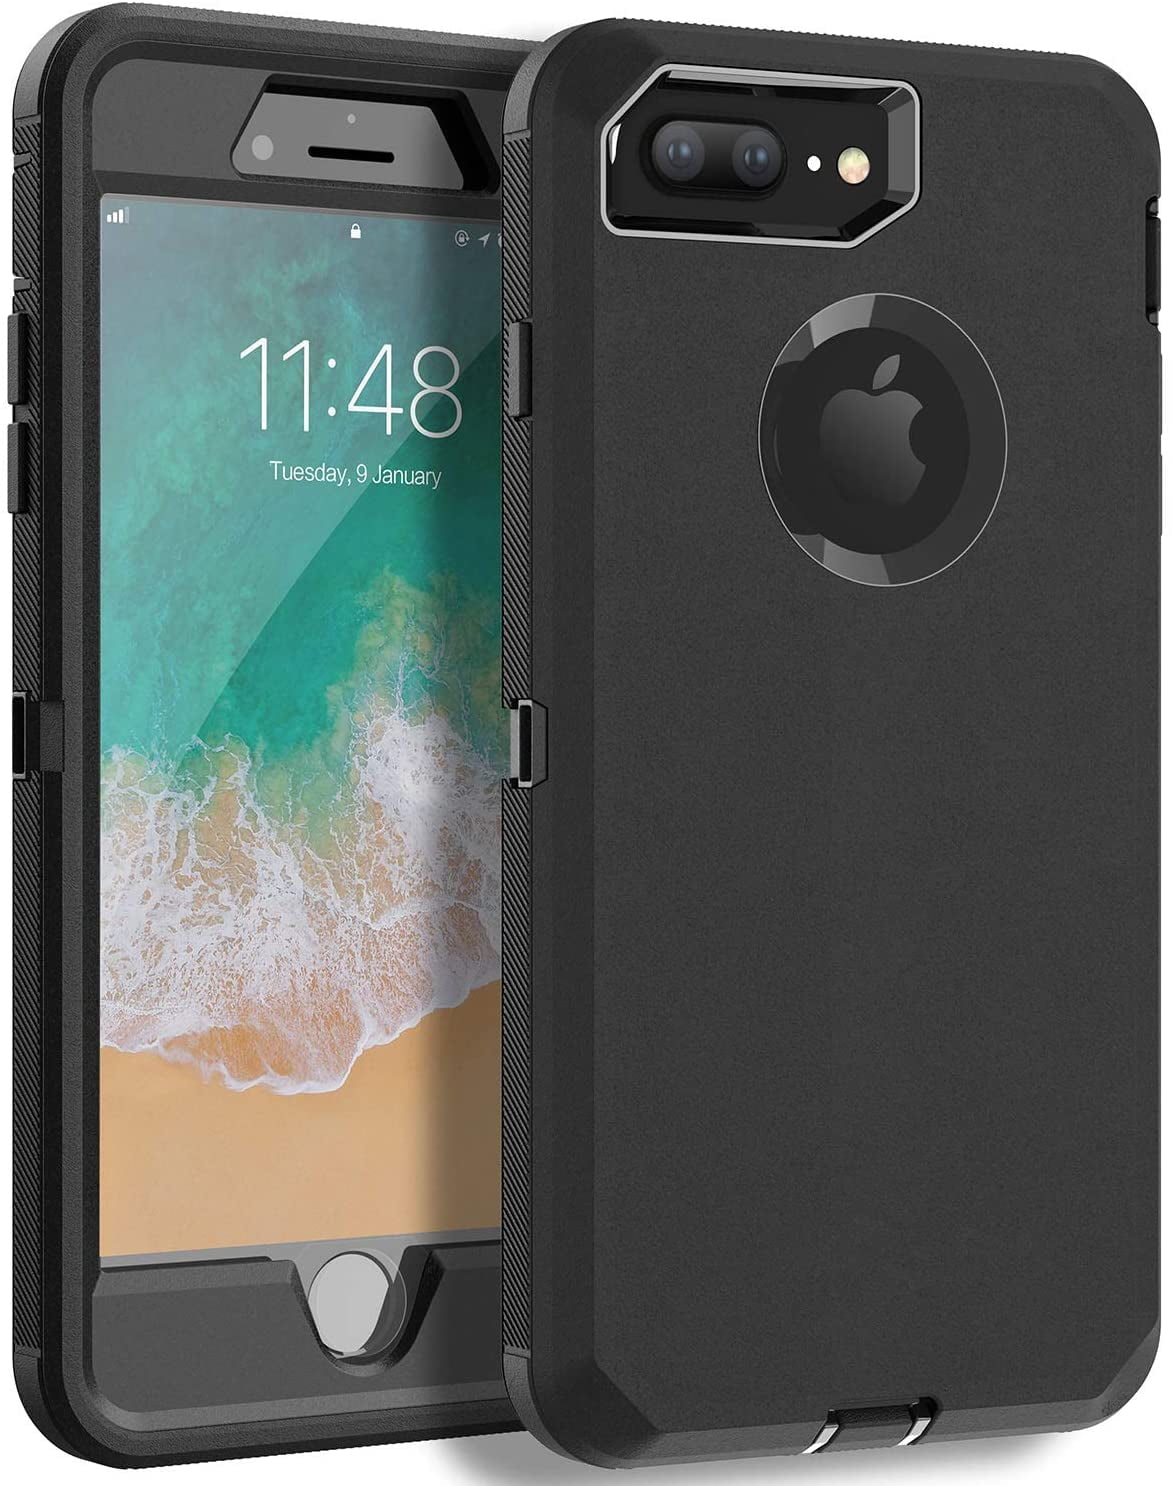 iPhone 7 Plus and iPhone 8 Plus Heavy Duty Case - {3 Layer Shock Absorbent Durable Case- Compatible for 7 Plus/ iPhone 8 Plus} - Walmart.com